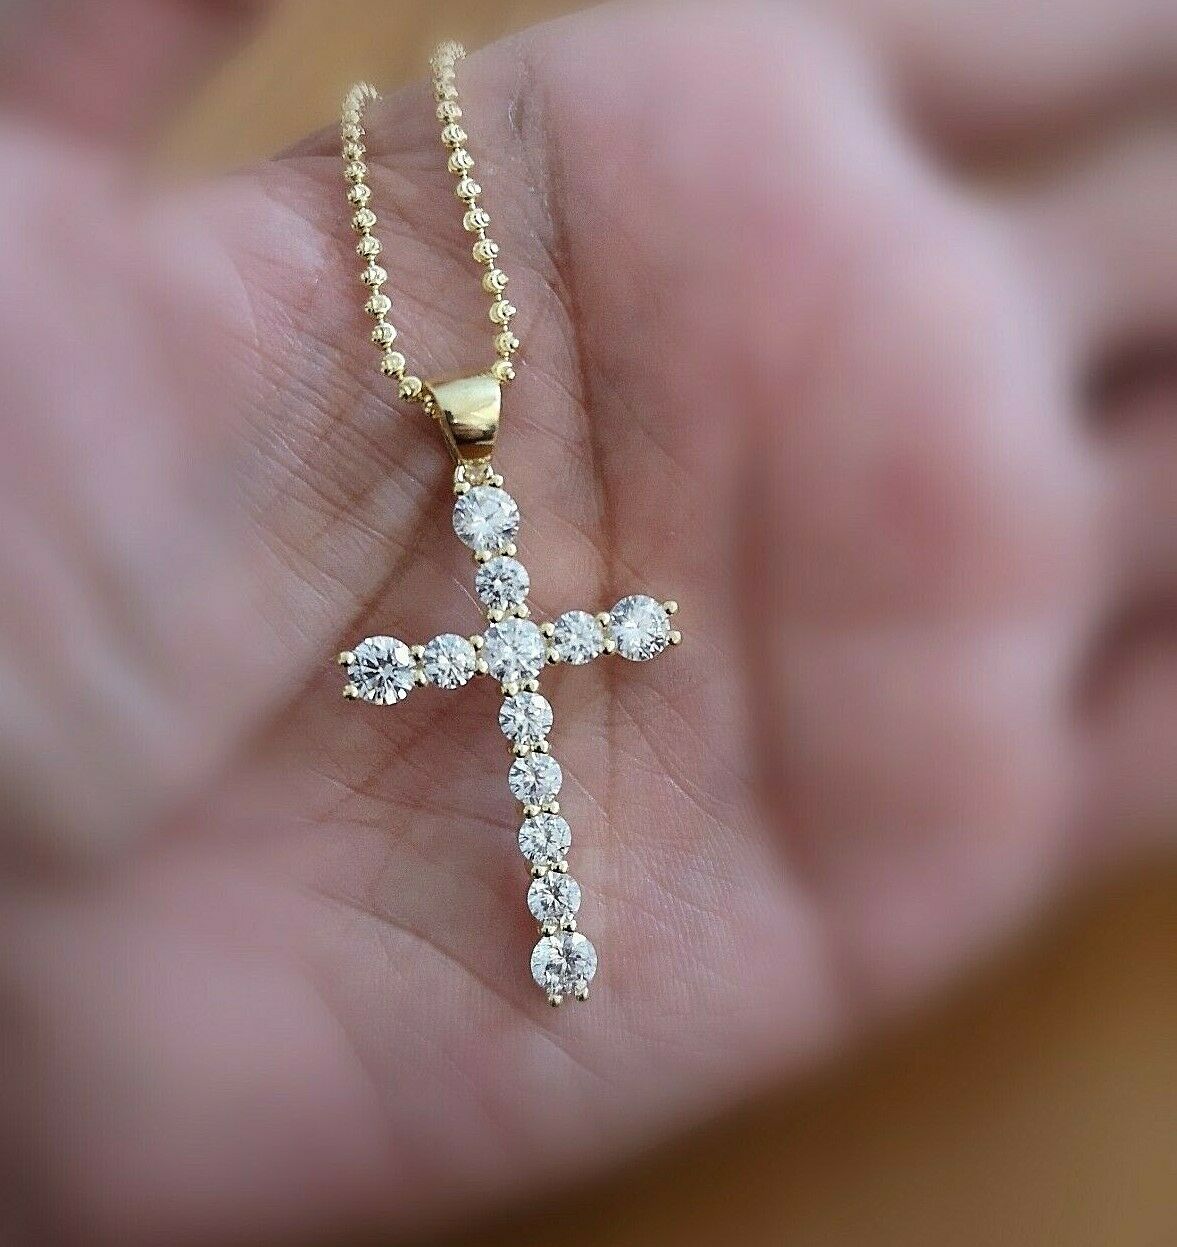 5ct Diamond Cross Pendant Necklace With Chain 14k Yellow Gold Over Women's Men's